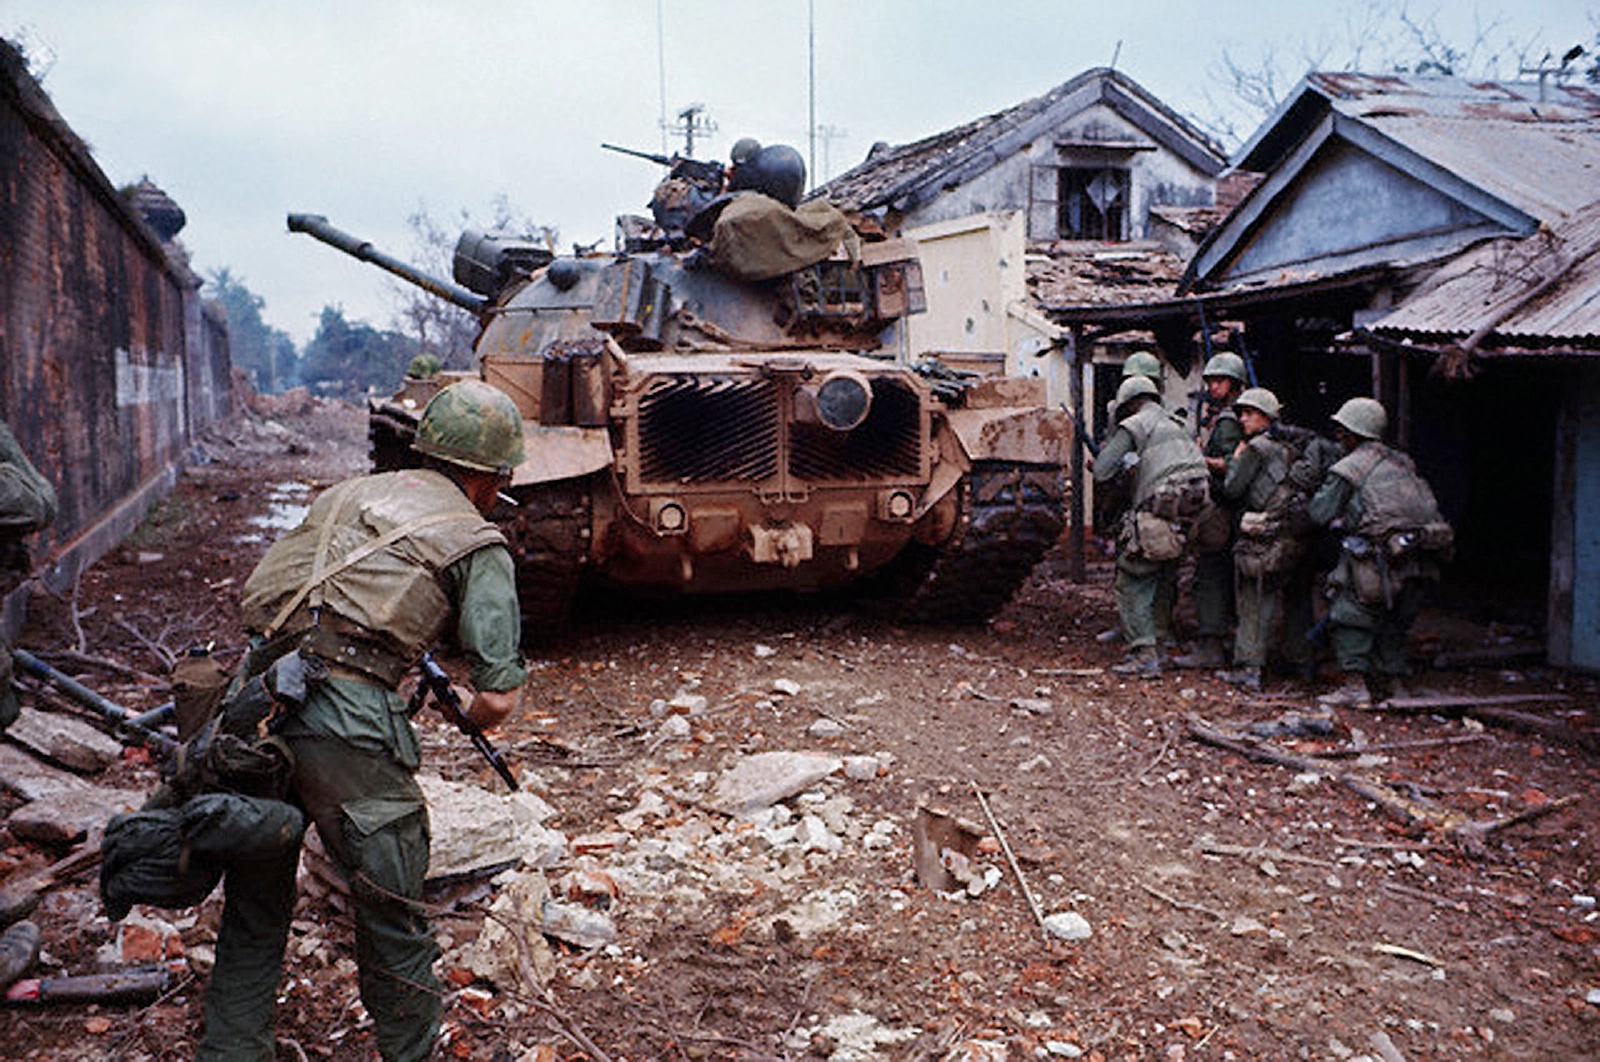 Vietnam War Engagement, Combat Ready Soldier, M48 Patton Tank, Urban Warfare, Military Readiness, Tactical Positioning, Armored Vehicles, M16 Rifle, Helmeted Soldier, Mud-Covered Tank, Devastated Urban Area, Battle Aftermath, Warzone Debris, Soldiers in Combat, War Tactics, Armed Conflict, Military Operation, Soldier Vigilance, Infantry Tactics, Color War Photography